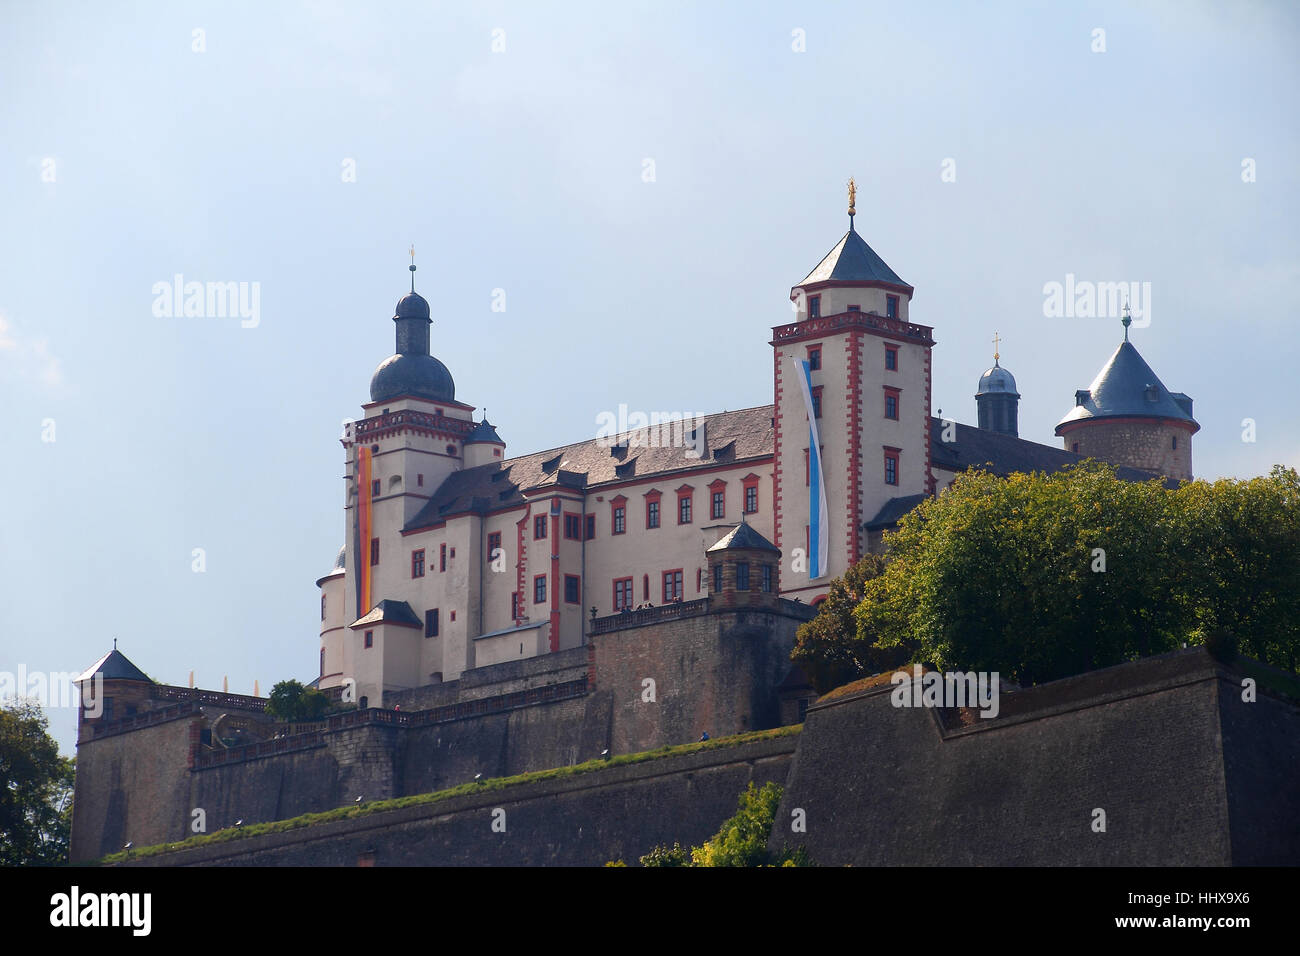 fortress, mountain, city, town, baroque, cultivation of wine, bavaria, Stock Photo